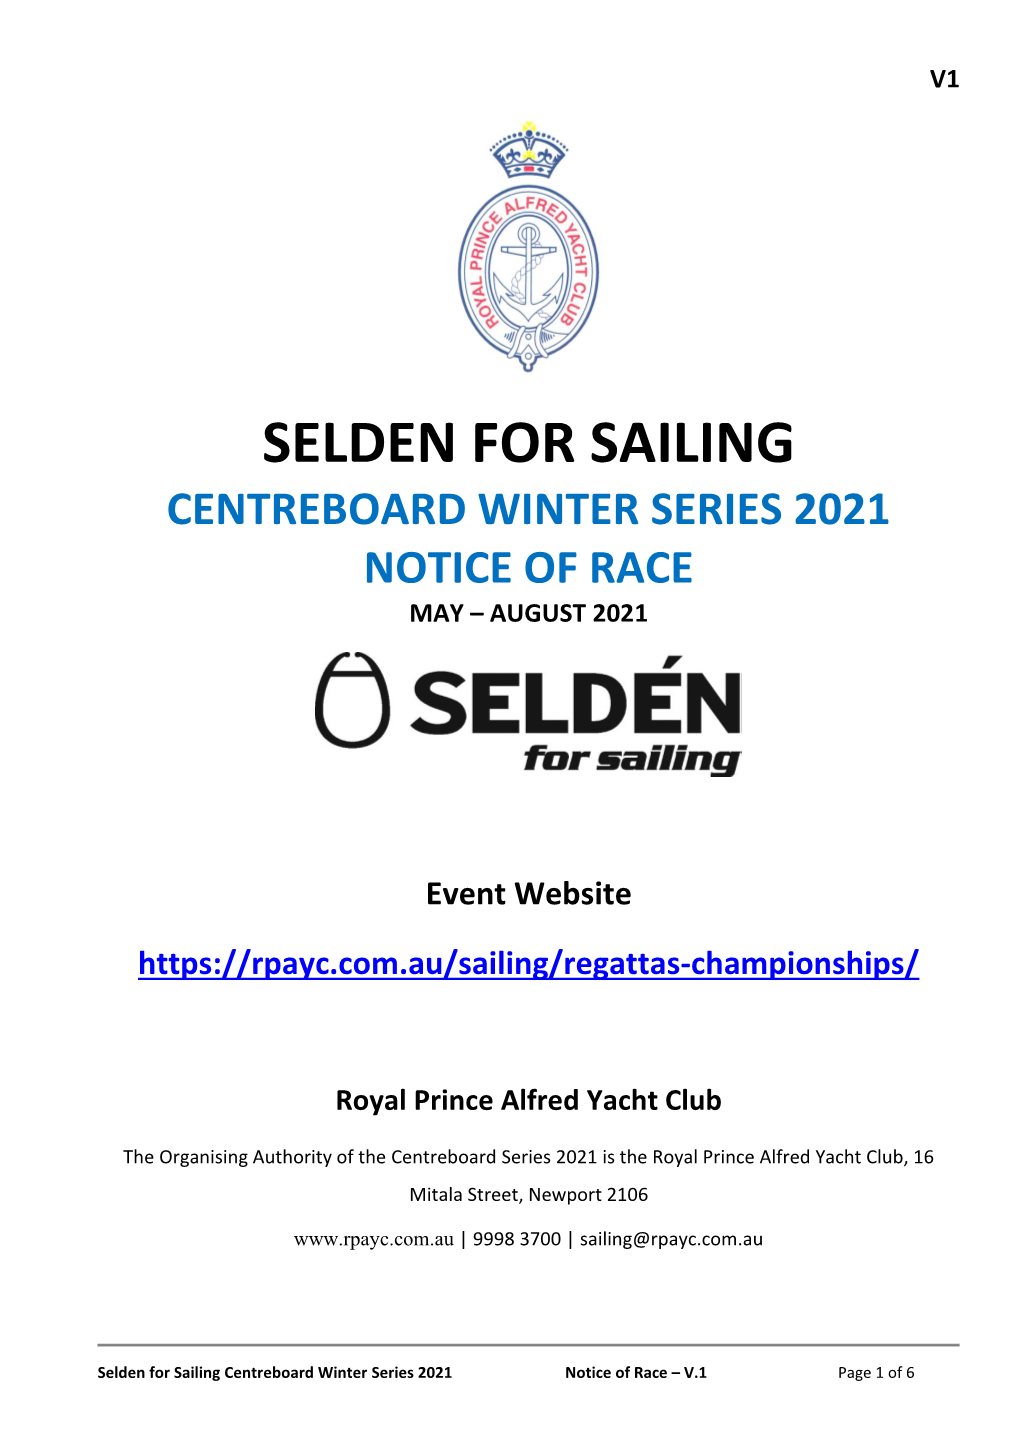 Selden for Sailing Centreboard Winter Series 2021 Notice of Race May – August 2021